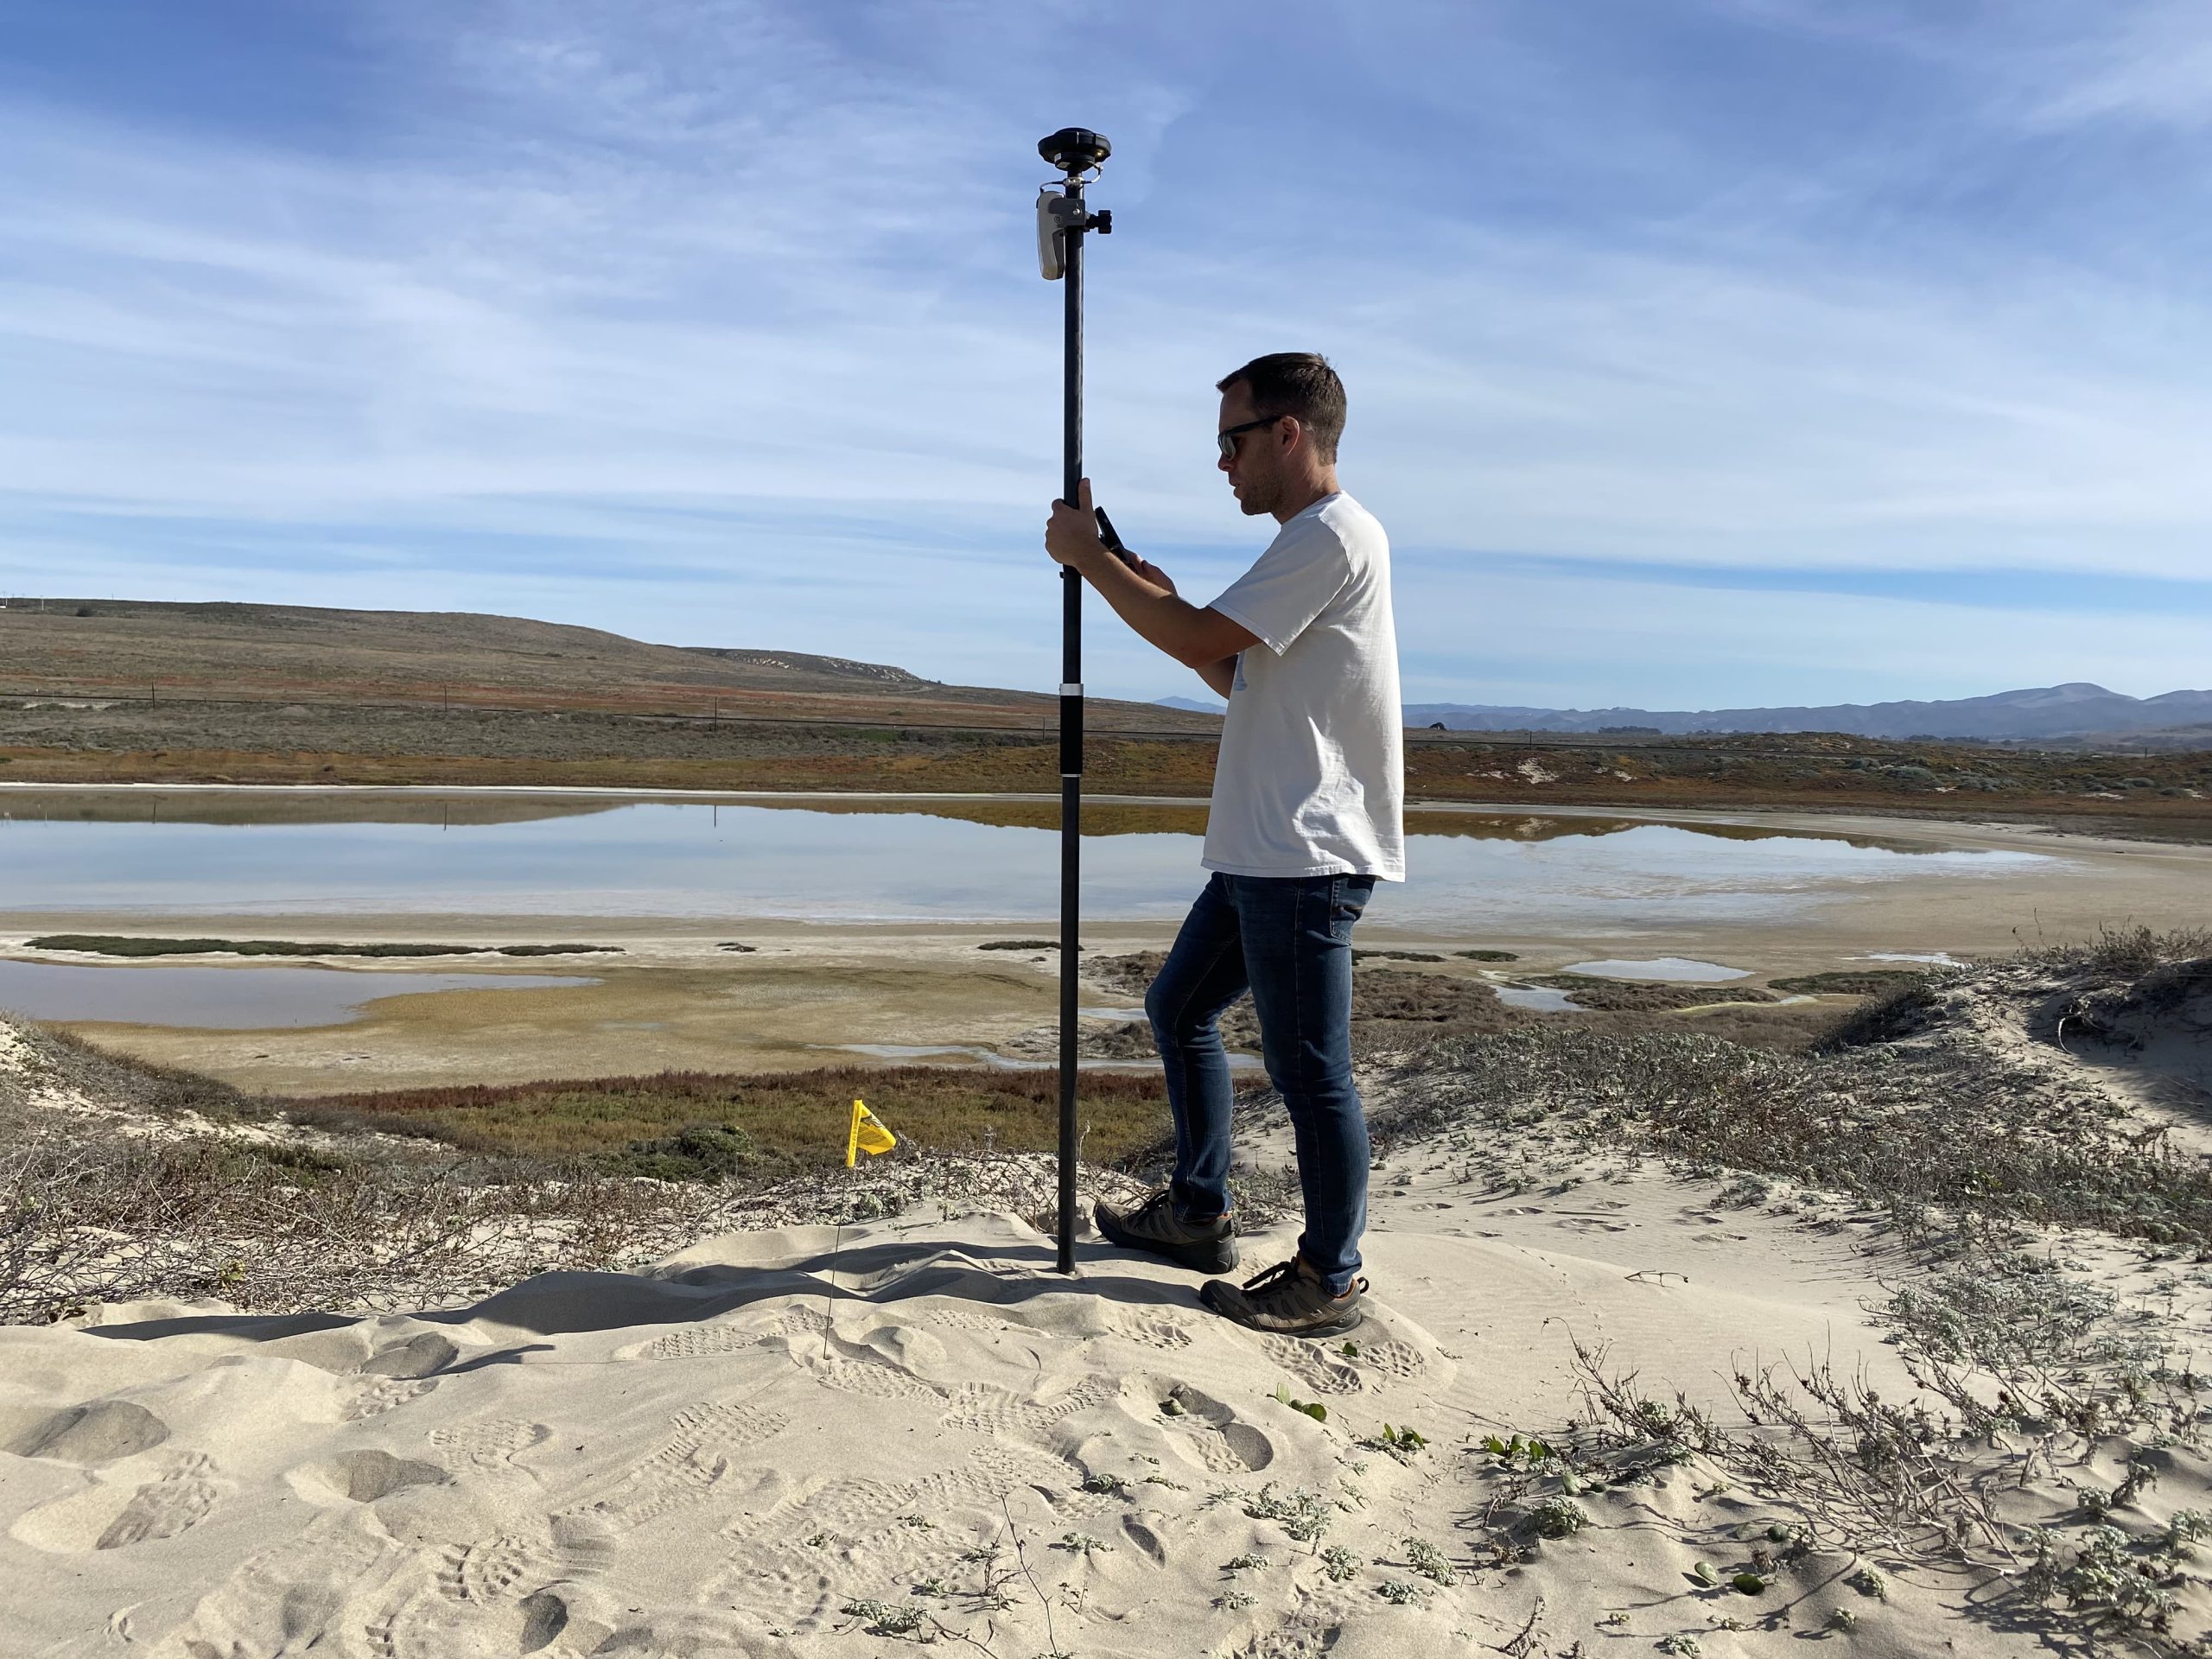 Dr. Kyle Emery, beach ecology study, collecting data with Arrow Gold GNSS receiver, ArcGIS Field Maps, iPhone